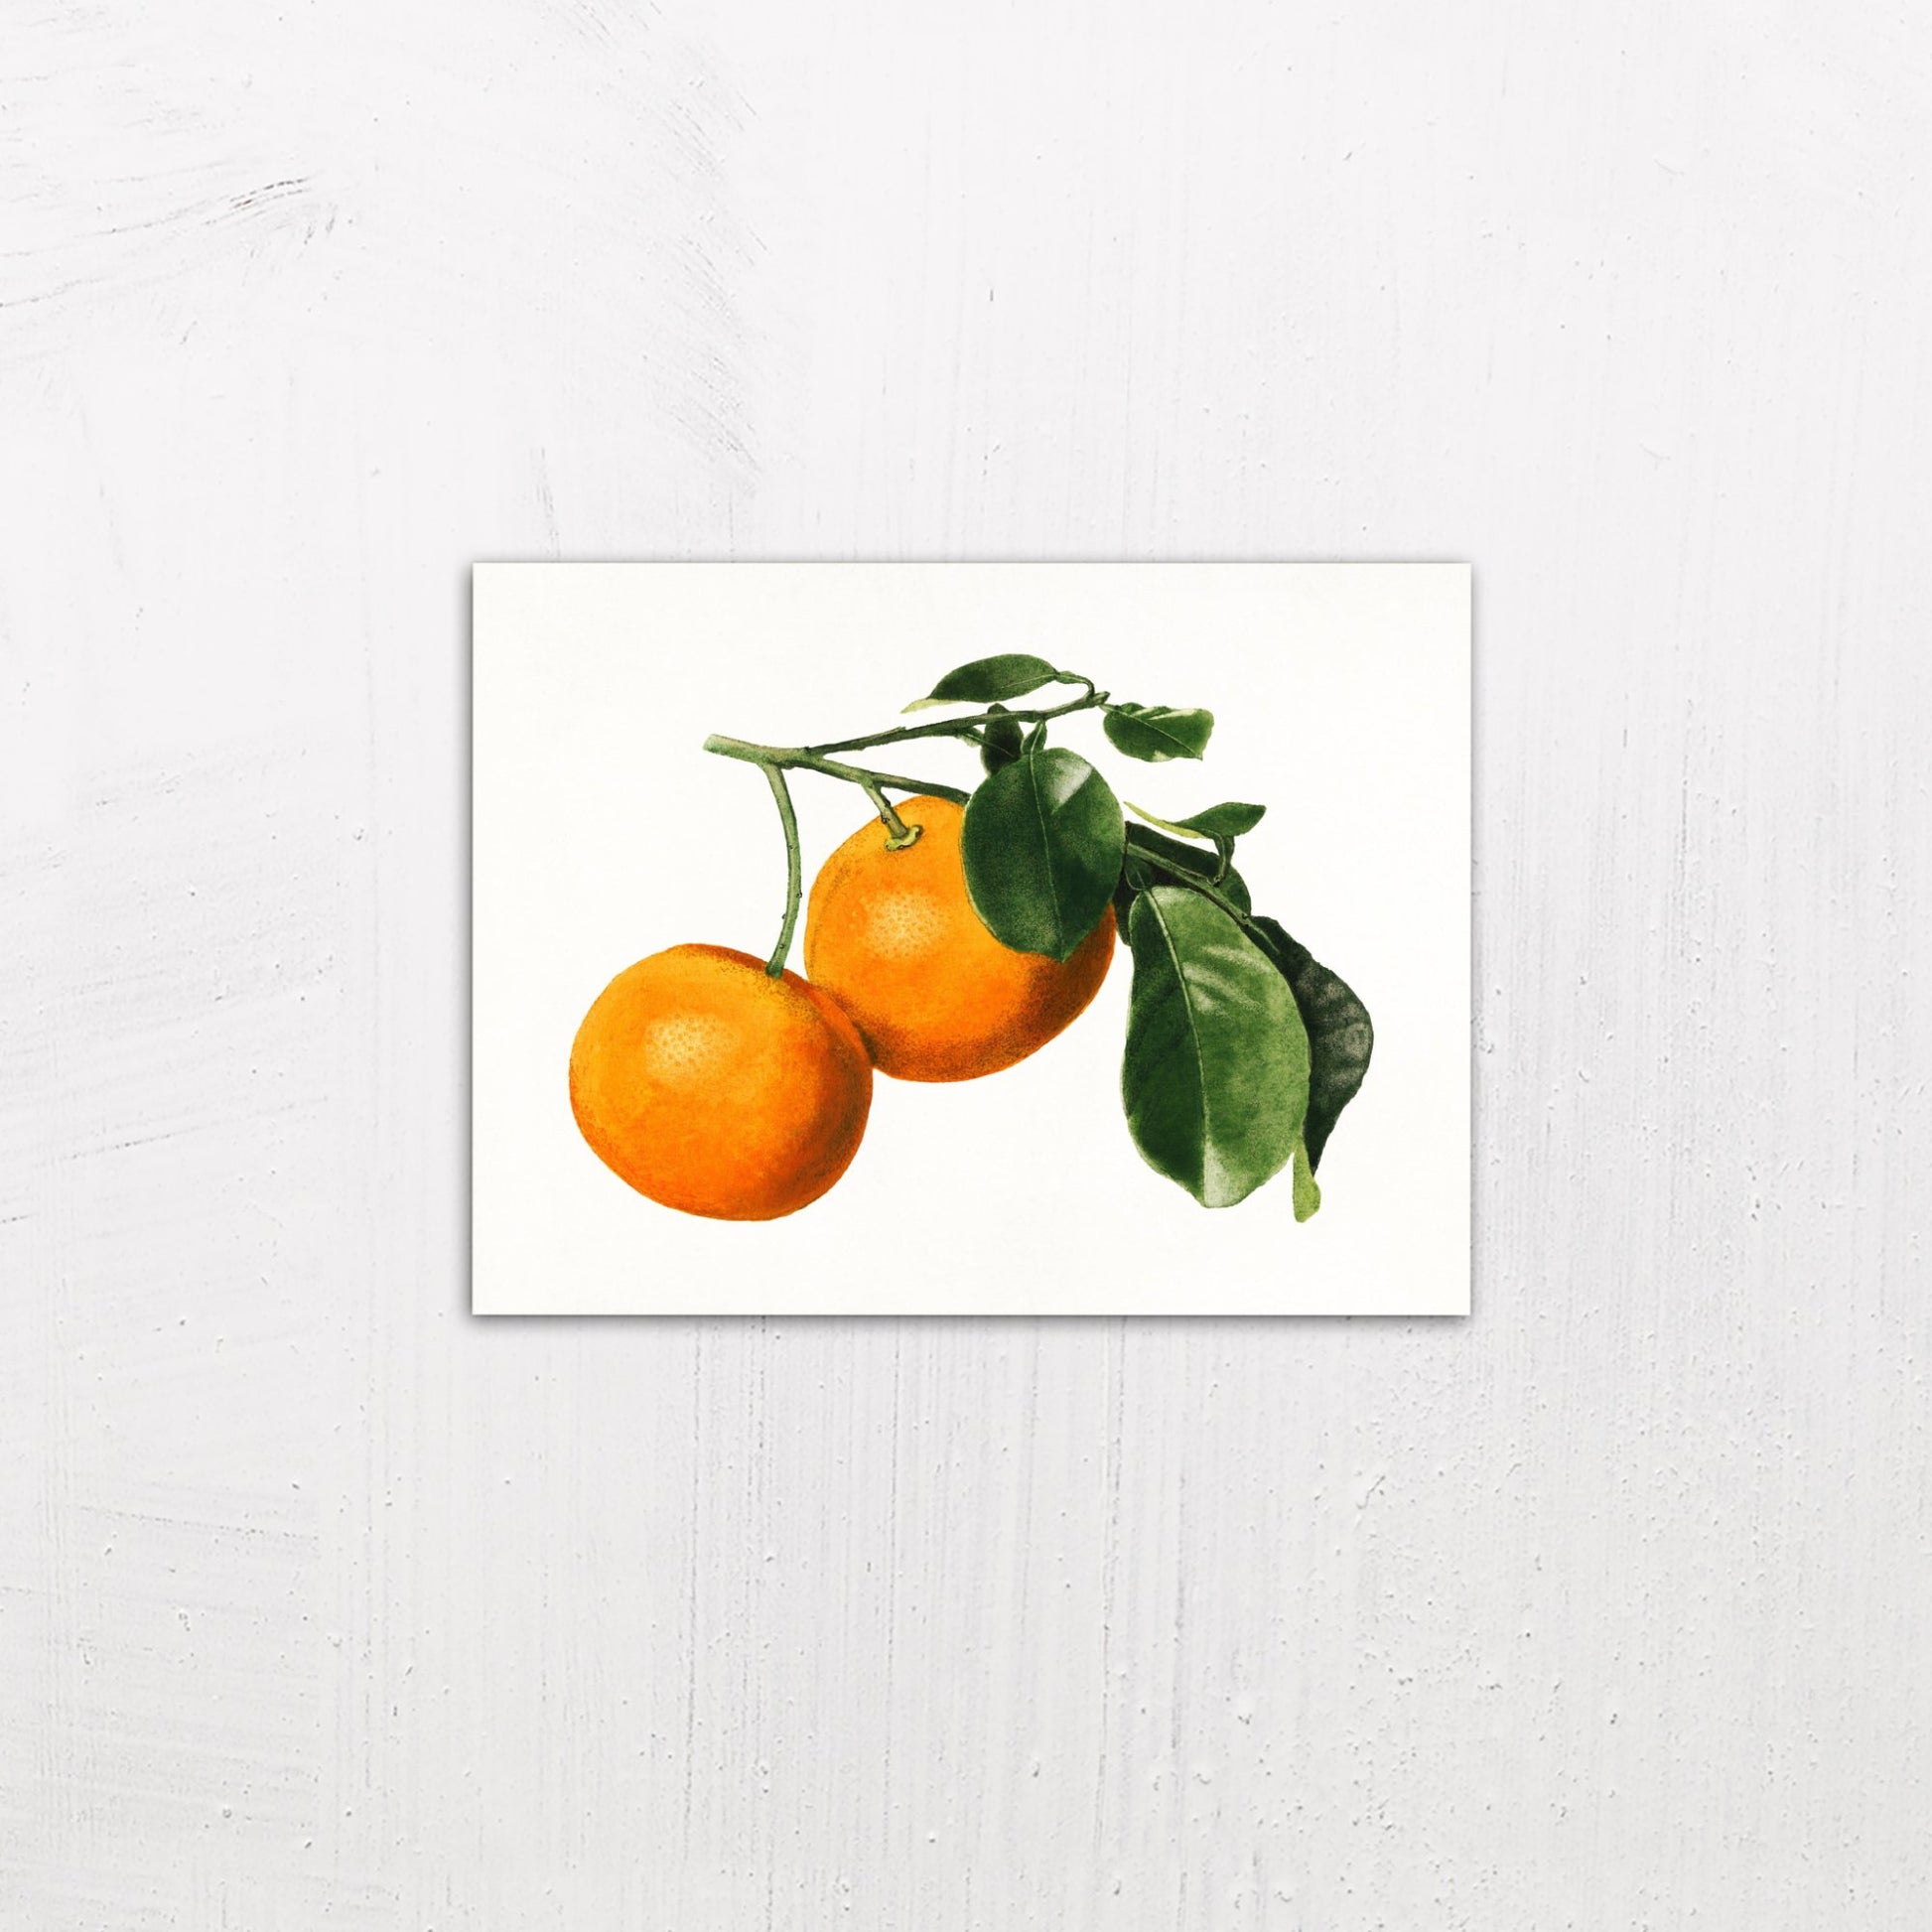 A small size metal art poster display plate with printed design of a Vintage Watercolour Illustration of Oranges